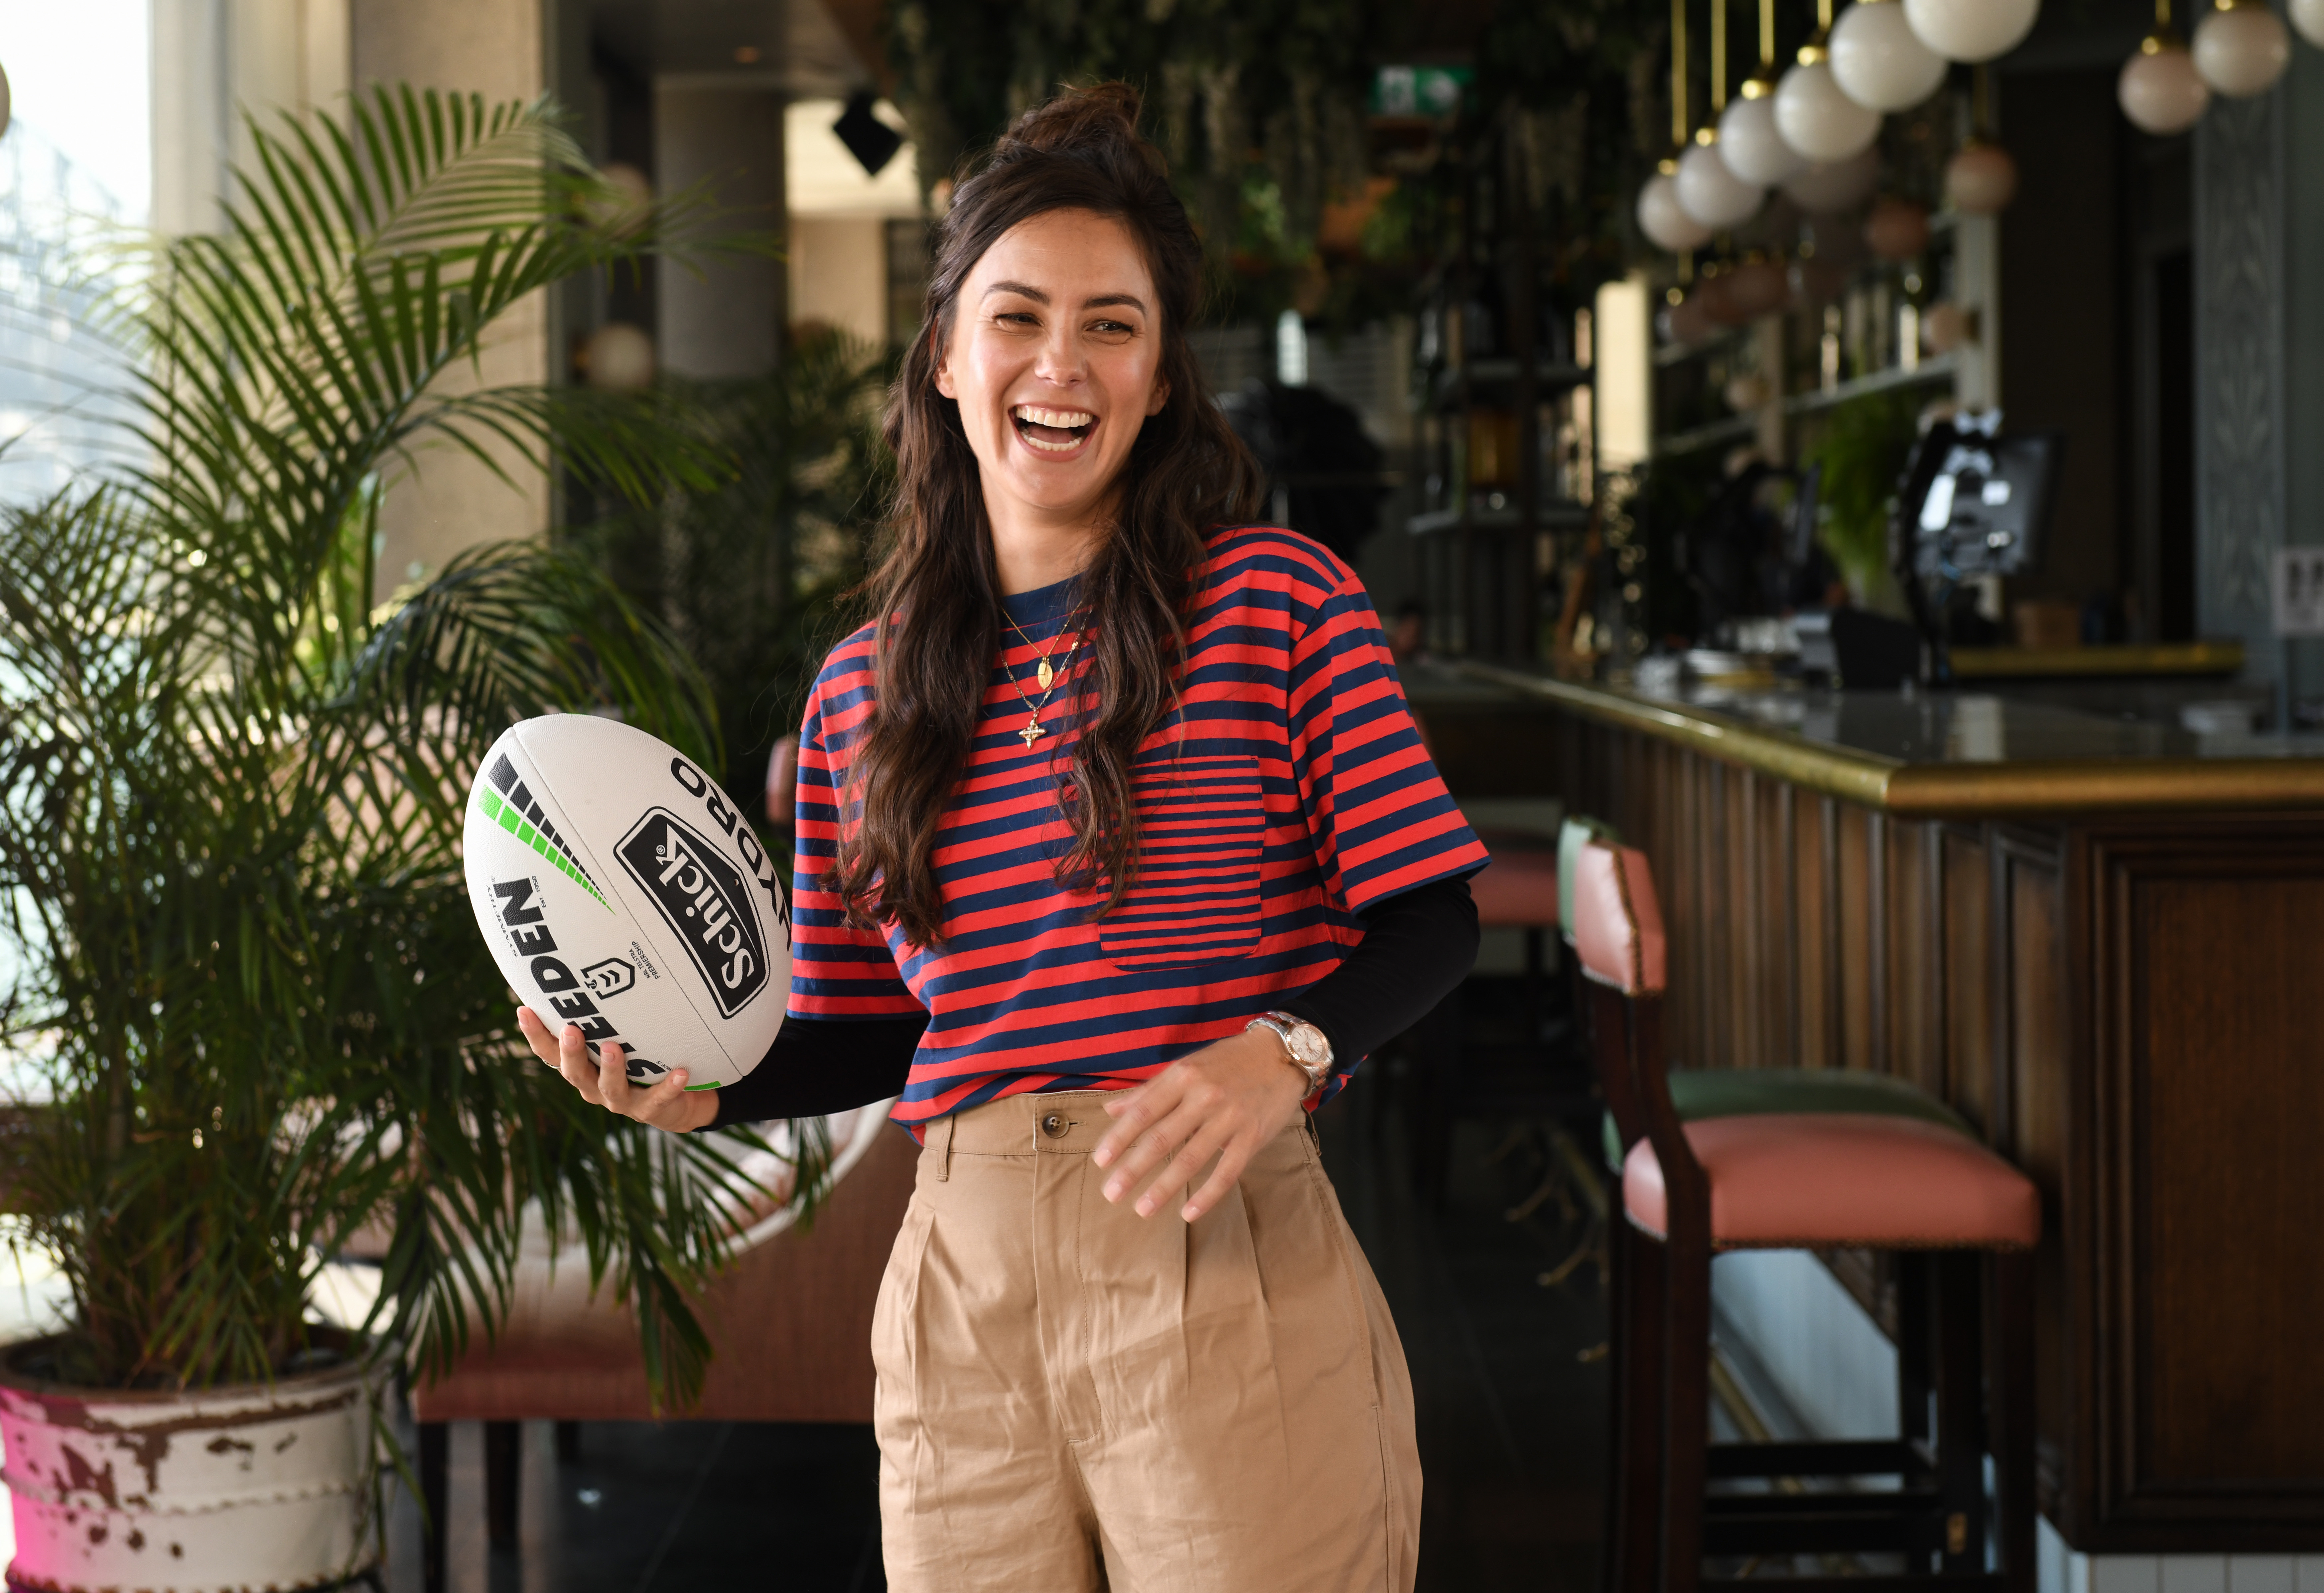 AAMI renews naming rights of AAMI Park, celebrates with exclusive Amy Shark performance for 1,000 fans